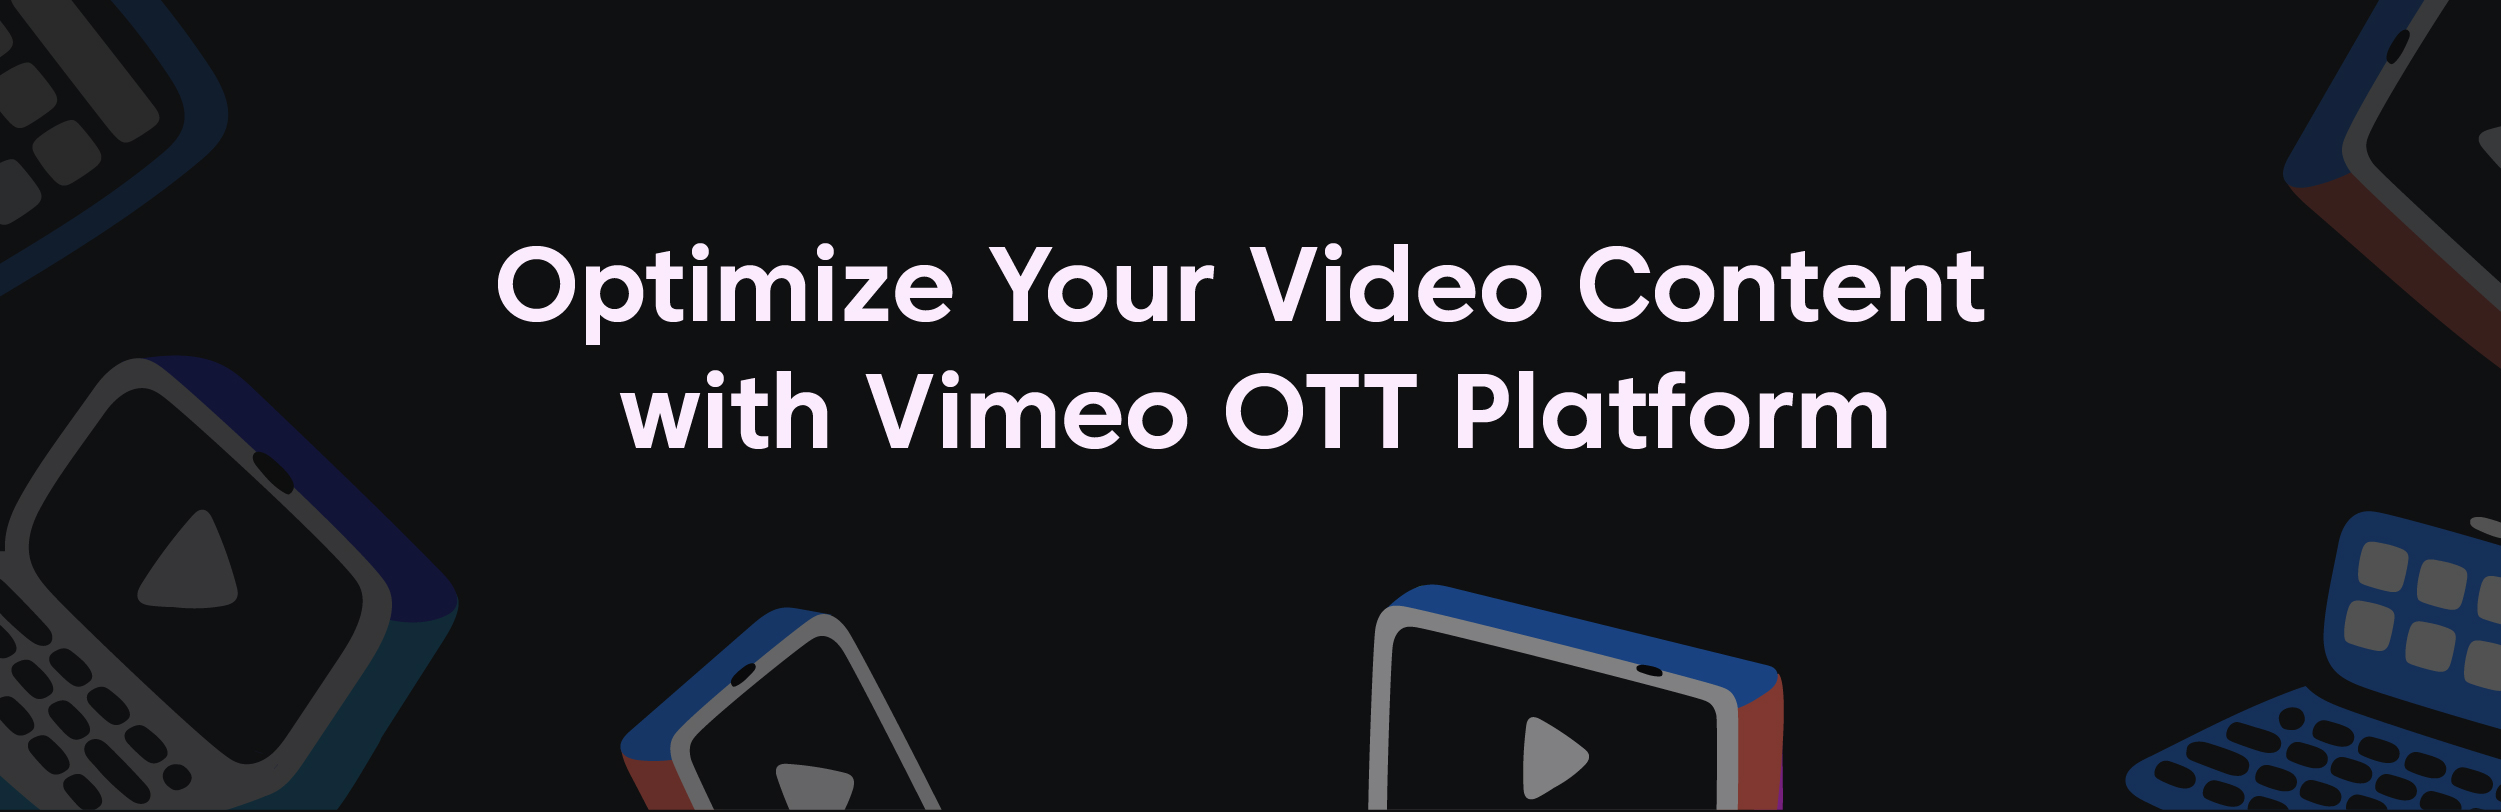 How to Optimize Your Video Content with Vimeo OTT Platform